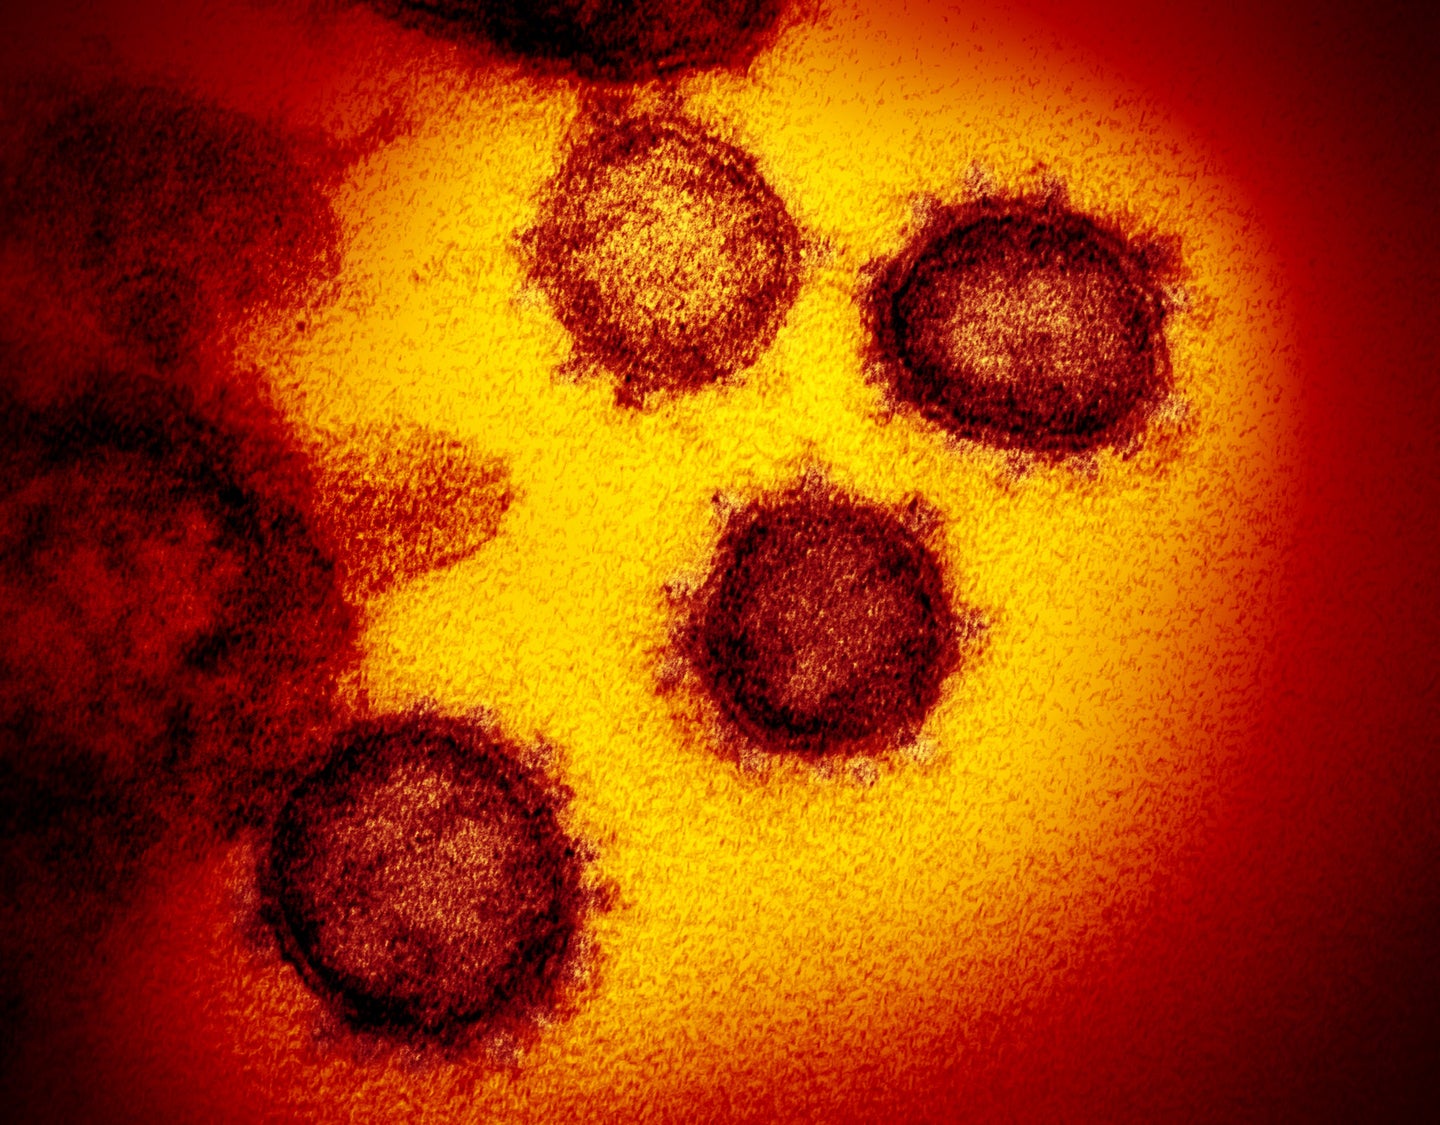 A microscope image of several SARS-CoV-2 virus particles.